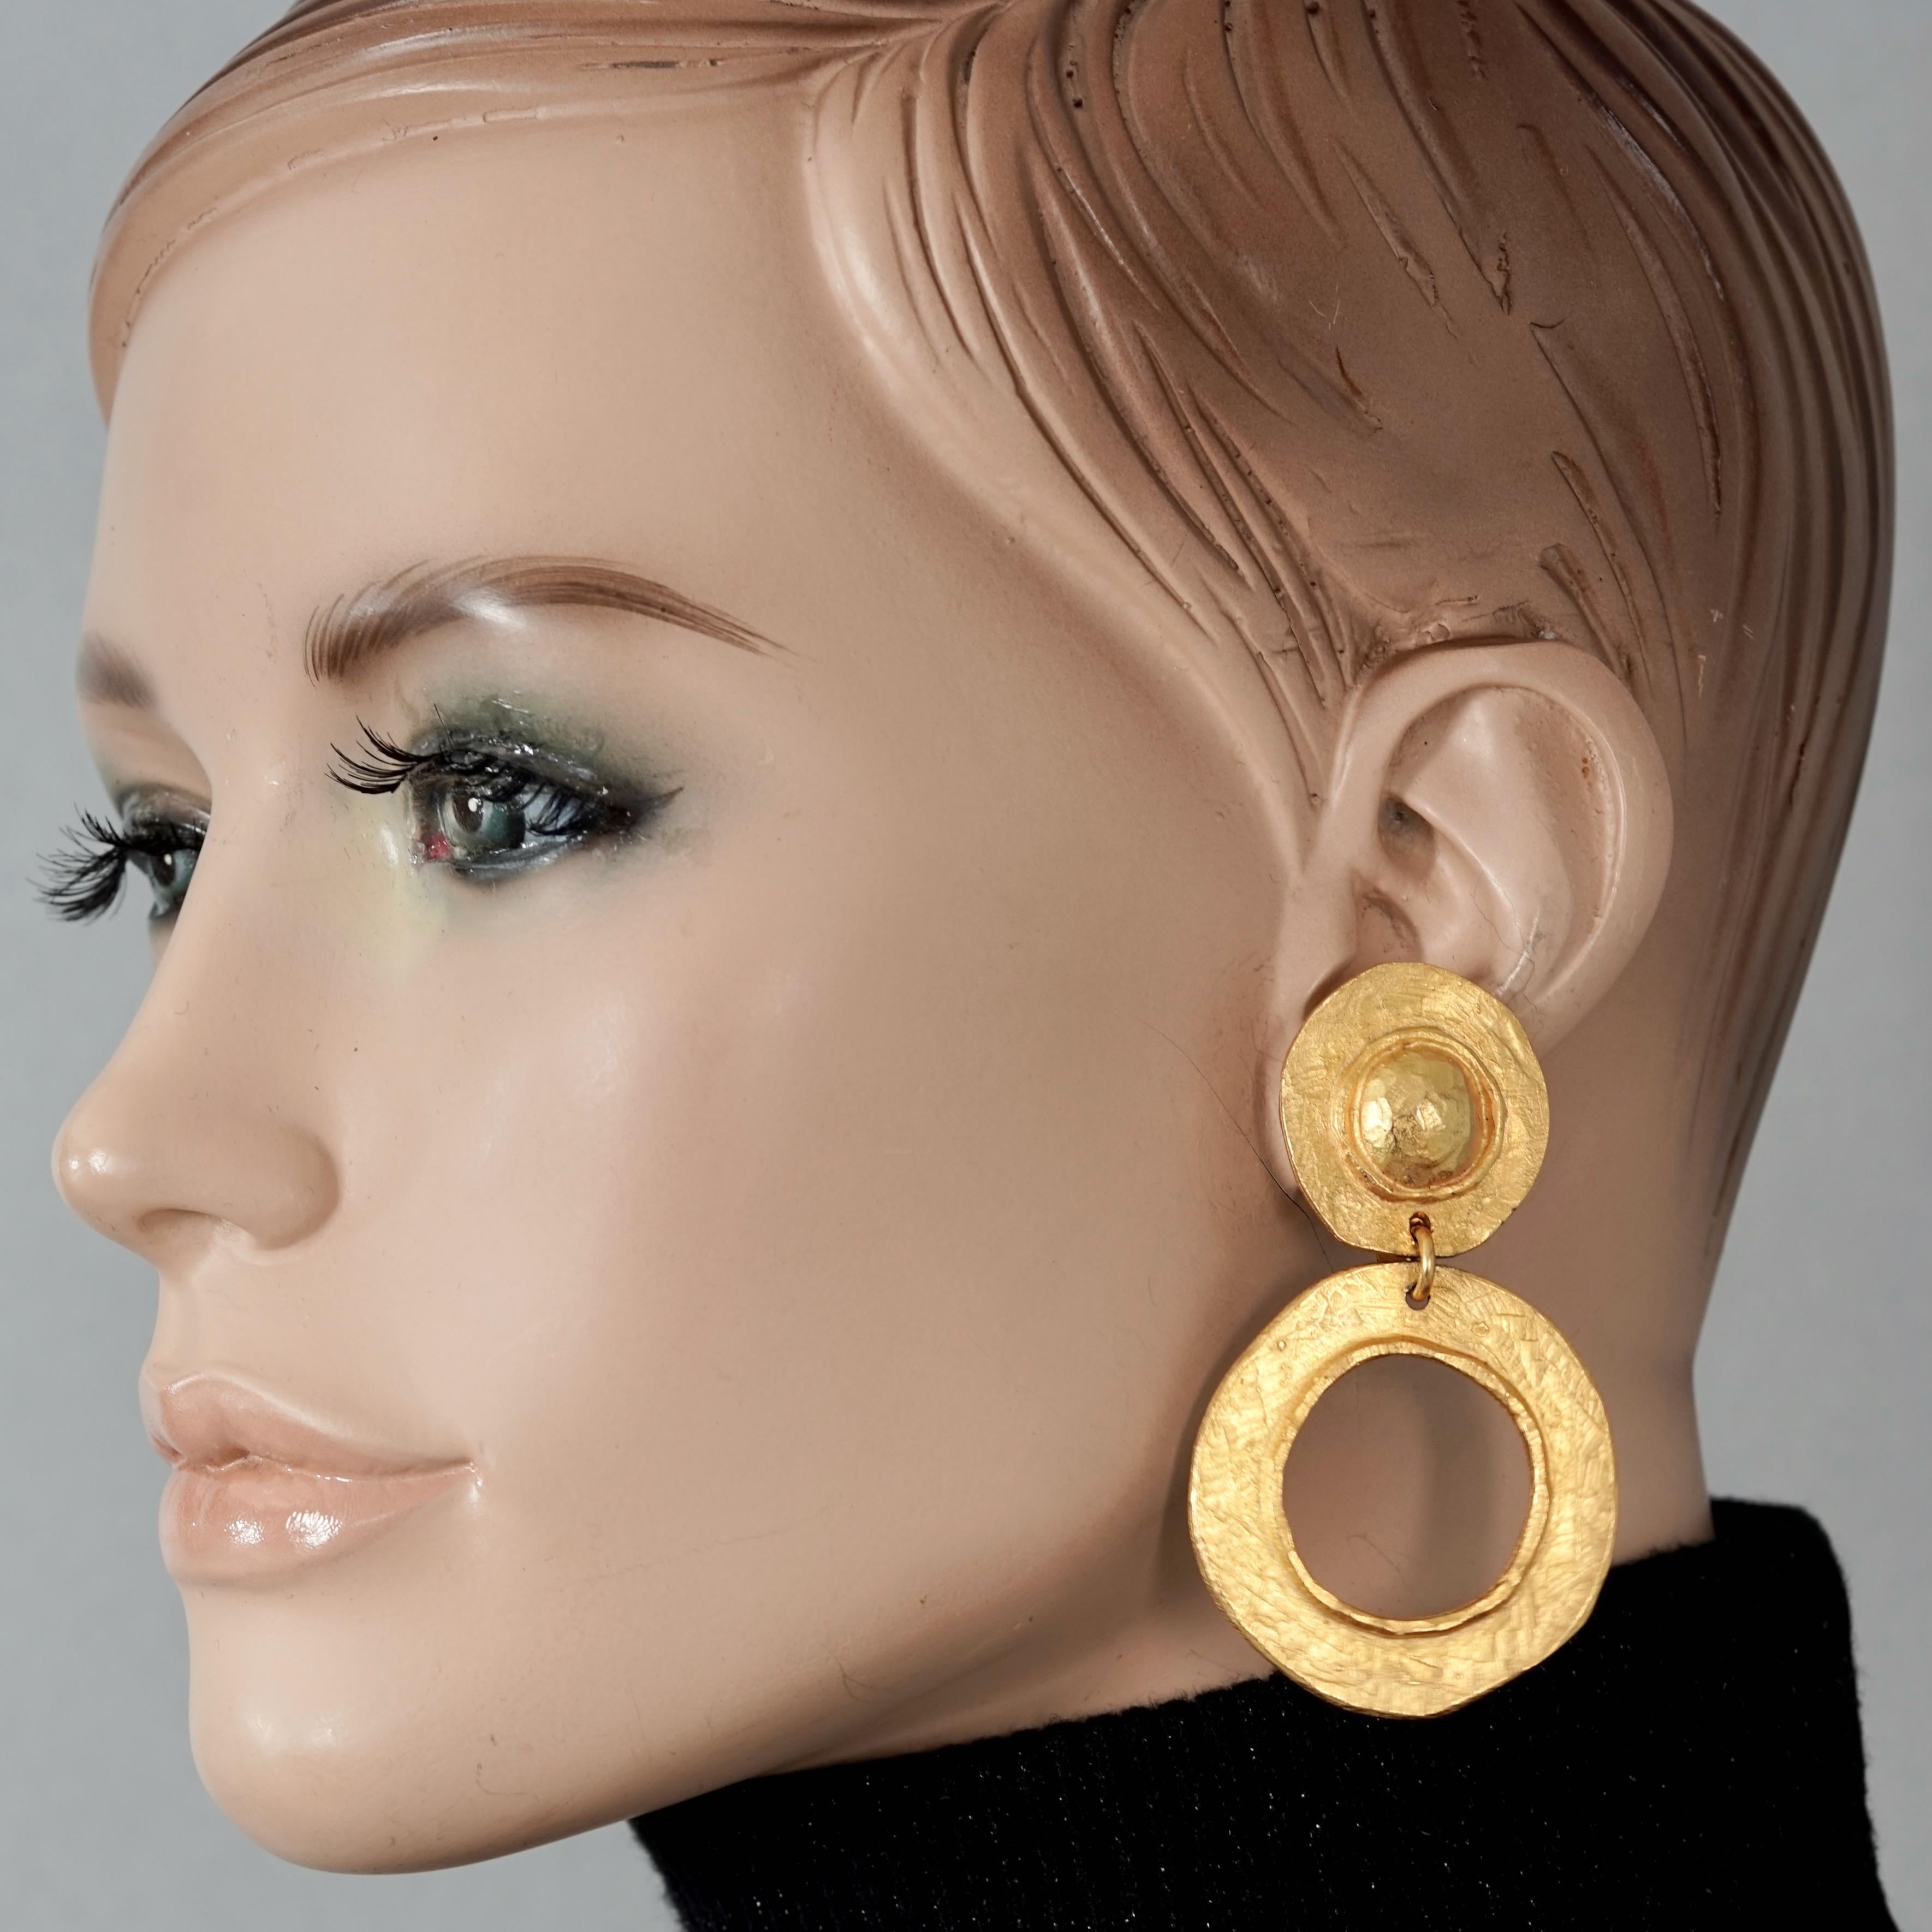 Vintage EDOUARD RAMBAUD Disc Hoop Dangling Earrings

Measurements:
Height: 2.75 inches (7 cm)
Width: 1.57 inches (4 cm)
Weight per Earring: 15 grams

Features:
- 100% Authentic EDOUARD RAMBAUD.
- Hammered disc hoop dangling earrings.
- Gold tone